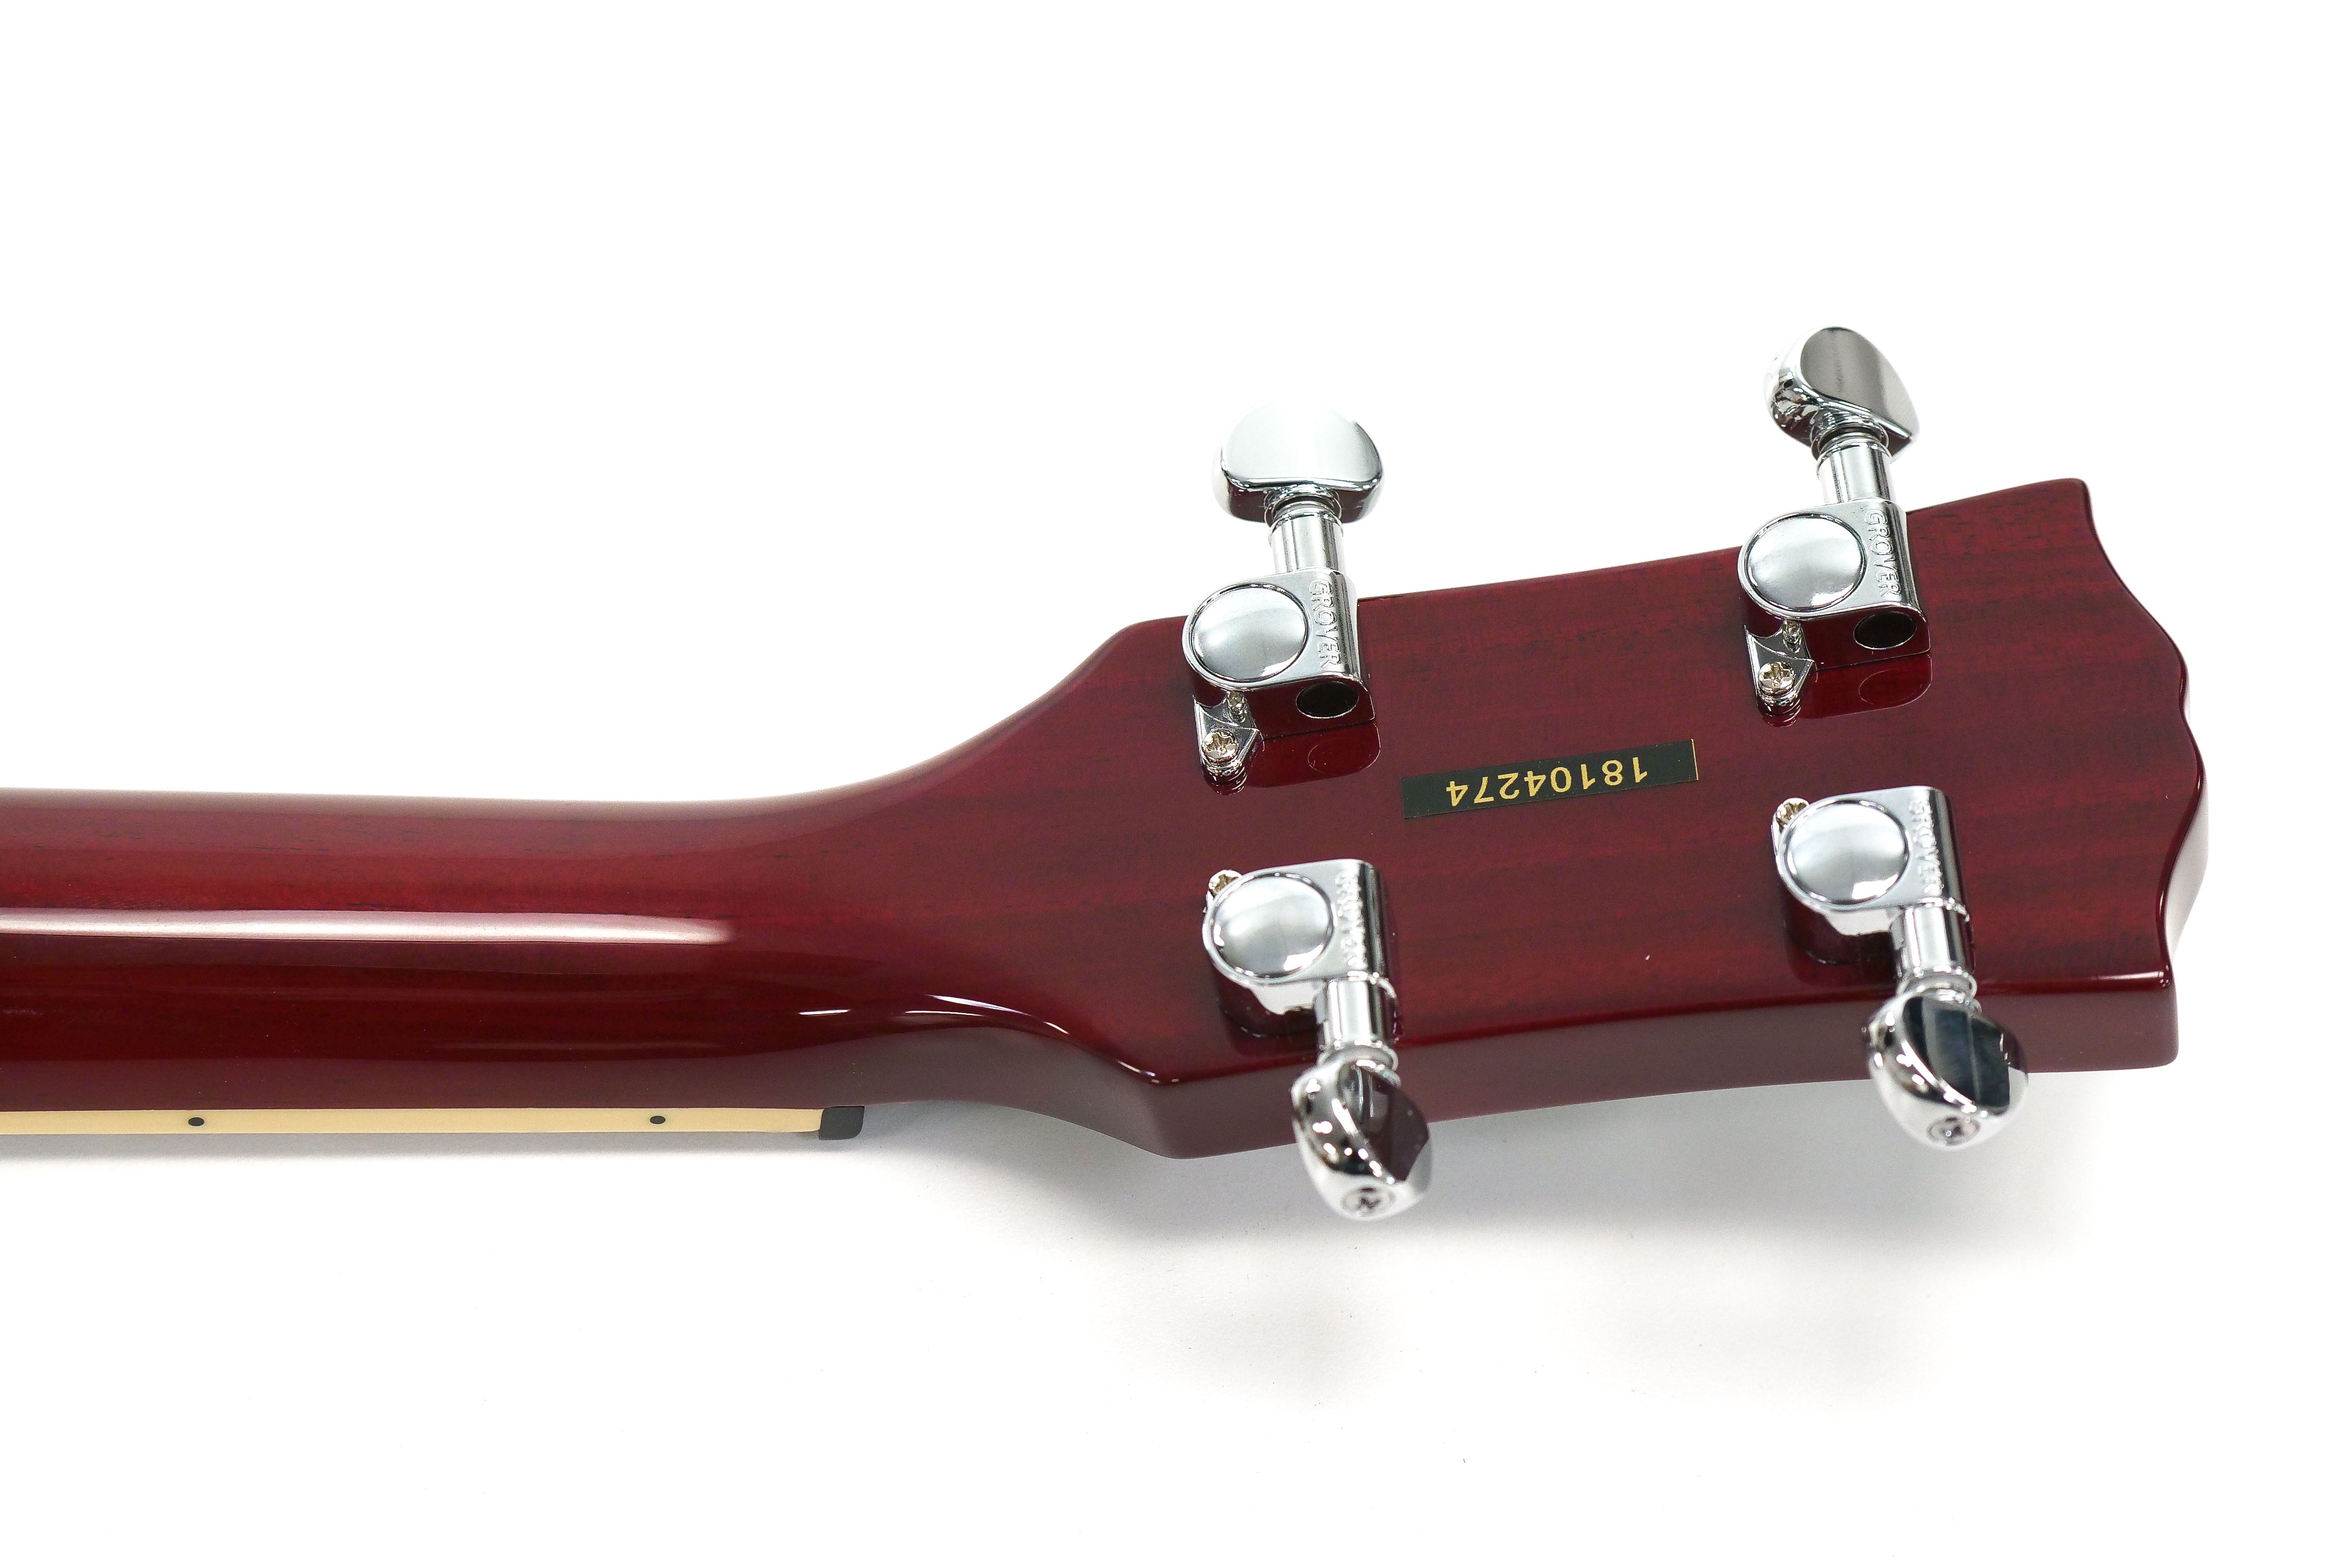 tuners on back of headstock with serial number